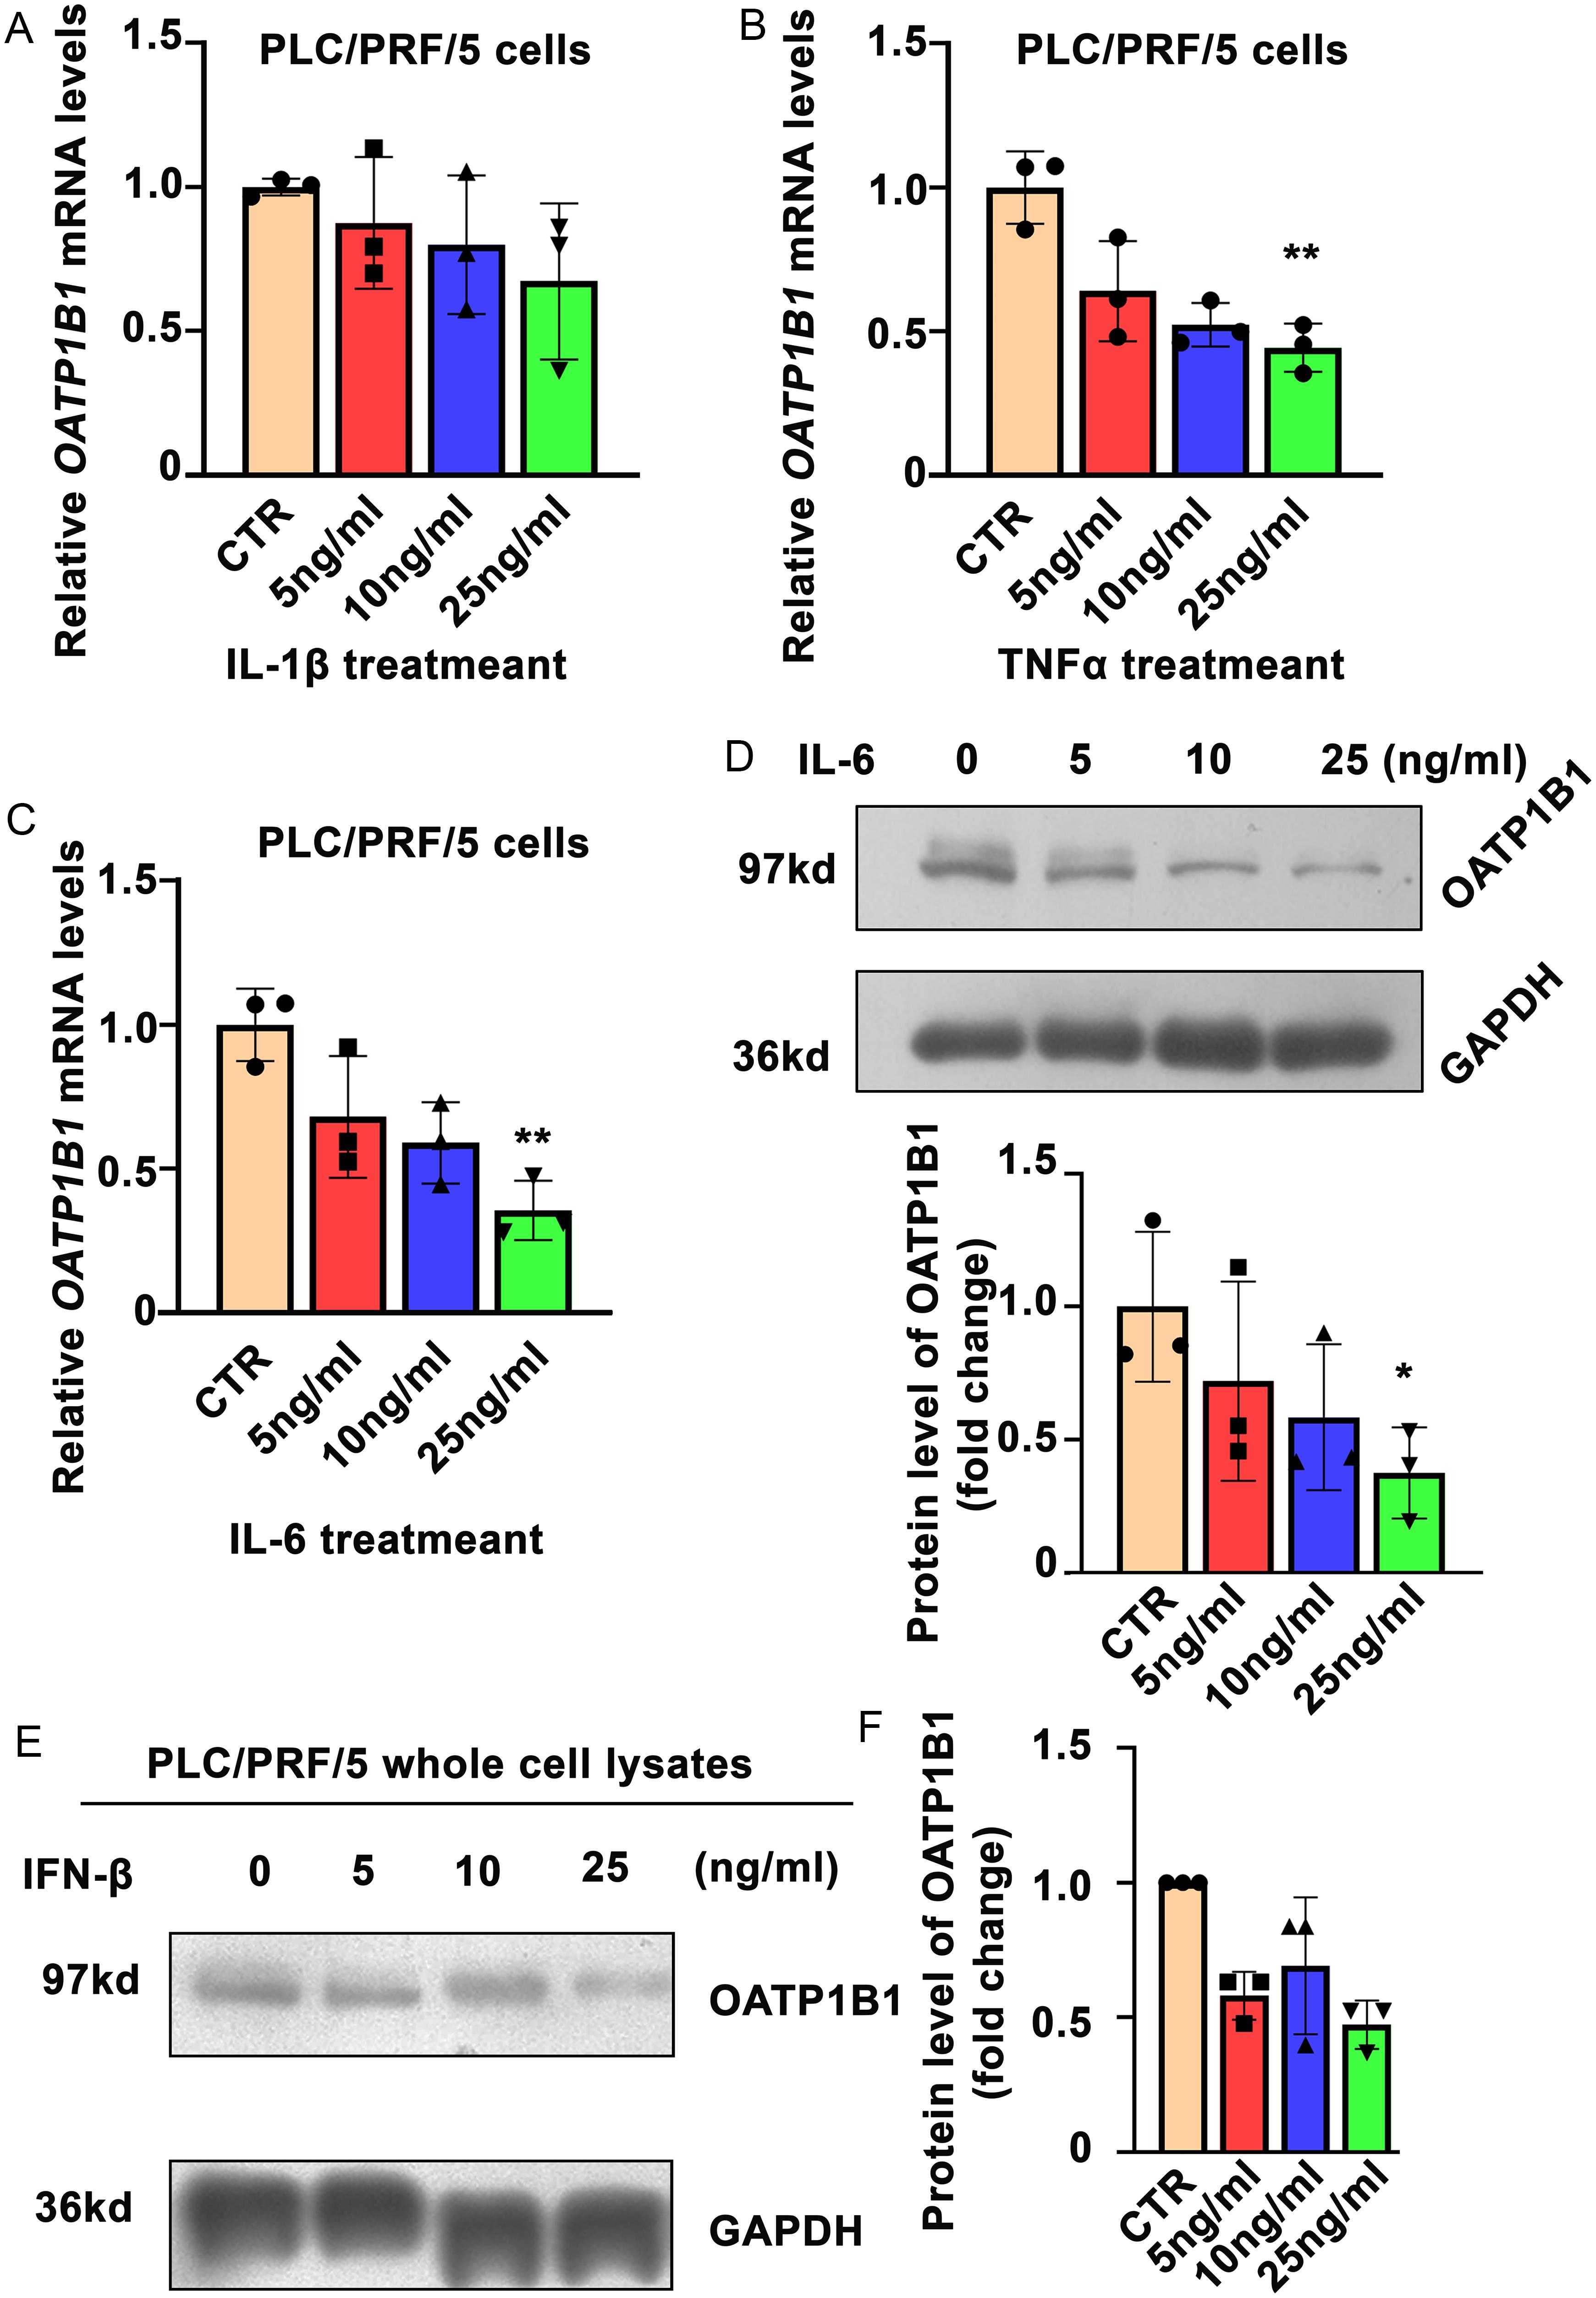 IL-6 induced the down-regulation of OATP1B1.